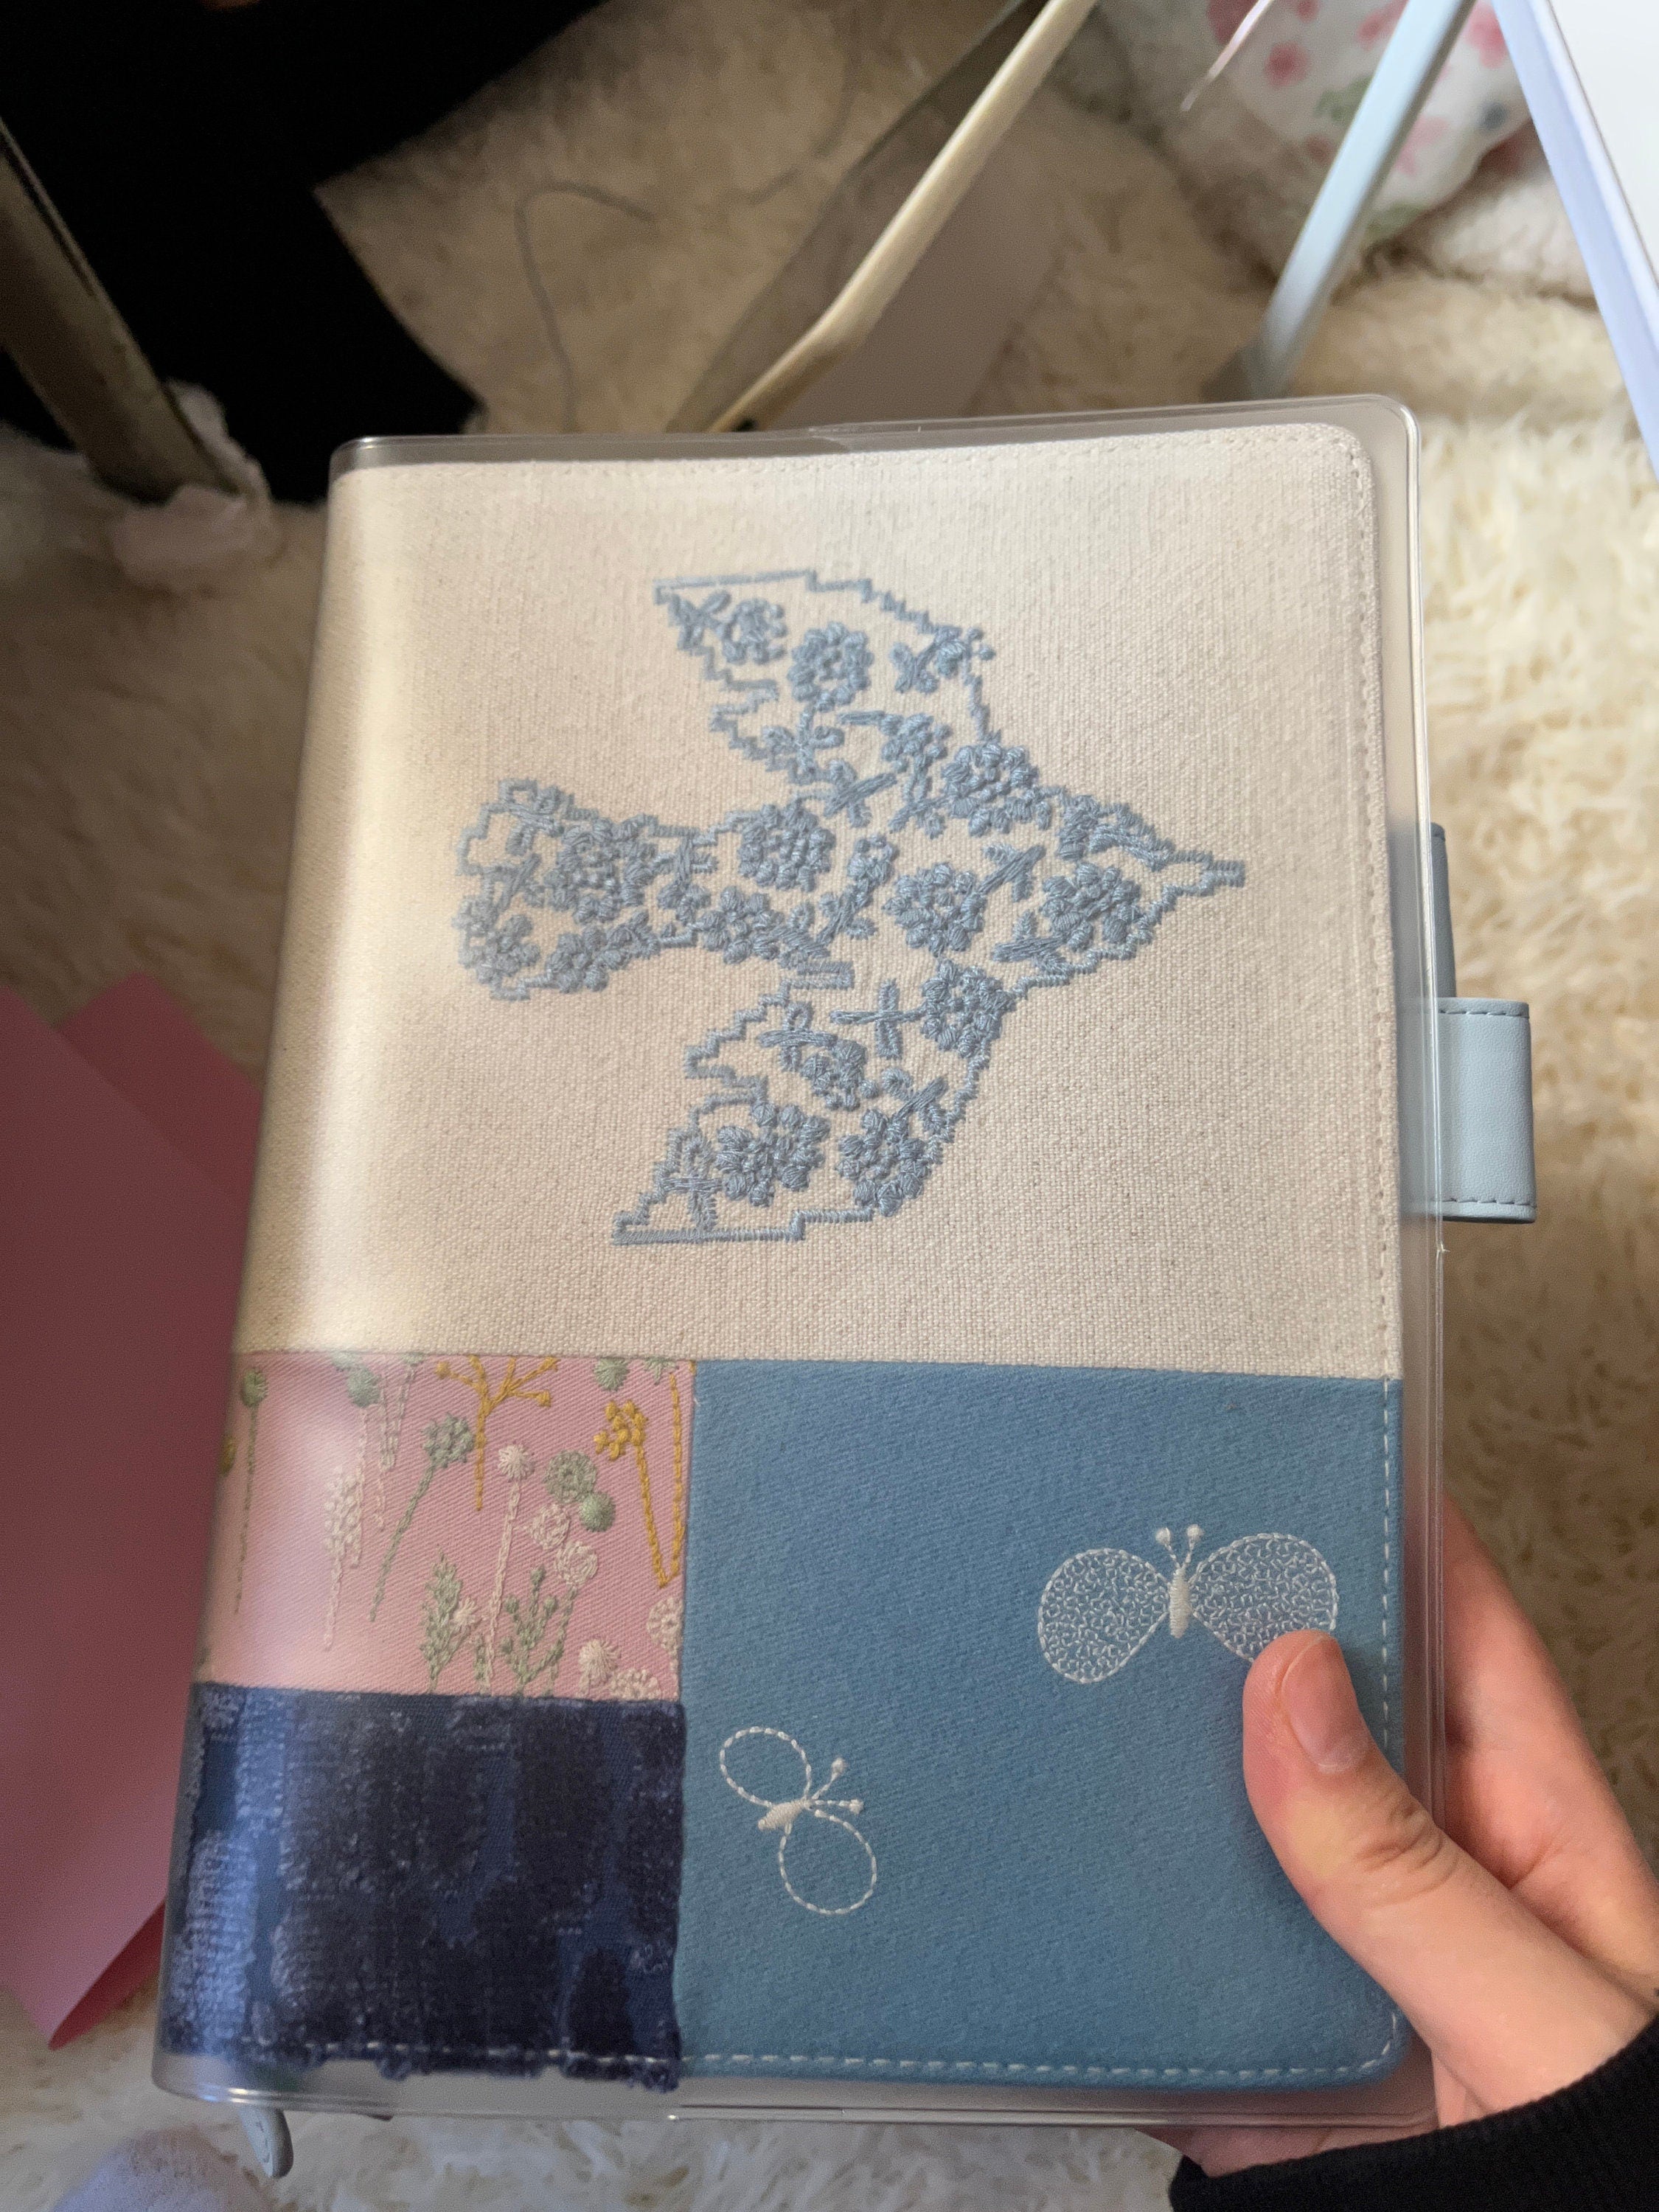 Handmade Patchwork Flying Bird Tree Circle Embroidery Notebook Cover Stitching Journal Fabric-Leather Cover A5 A6 TN Weeks Graduation Gifts